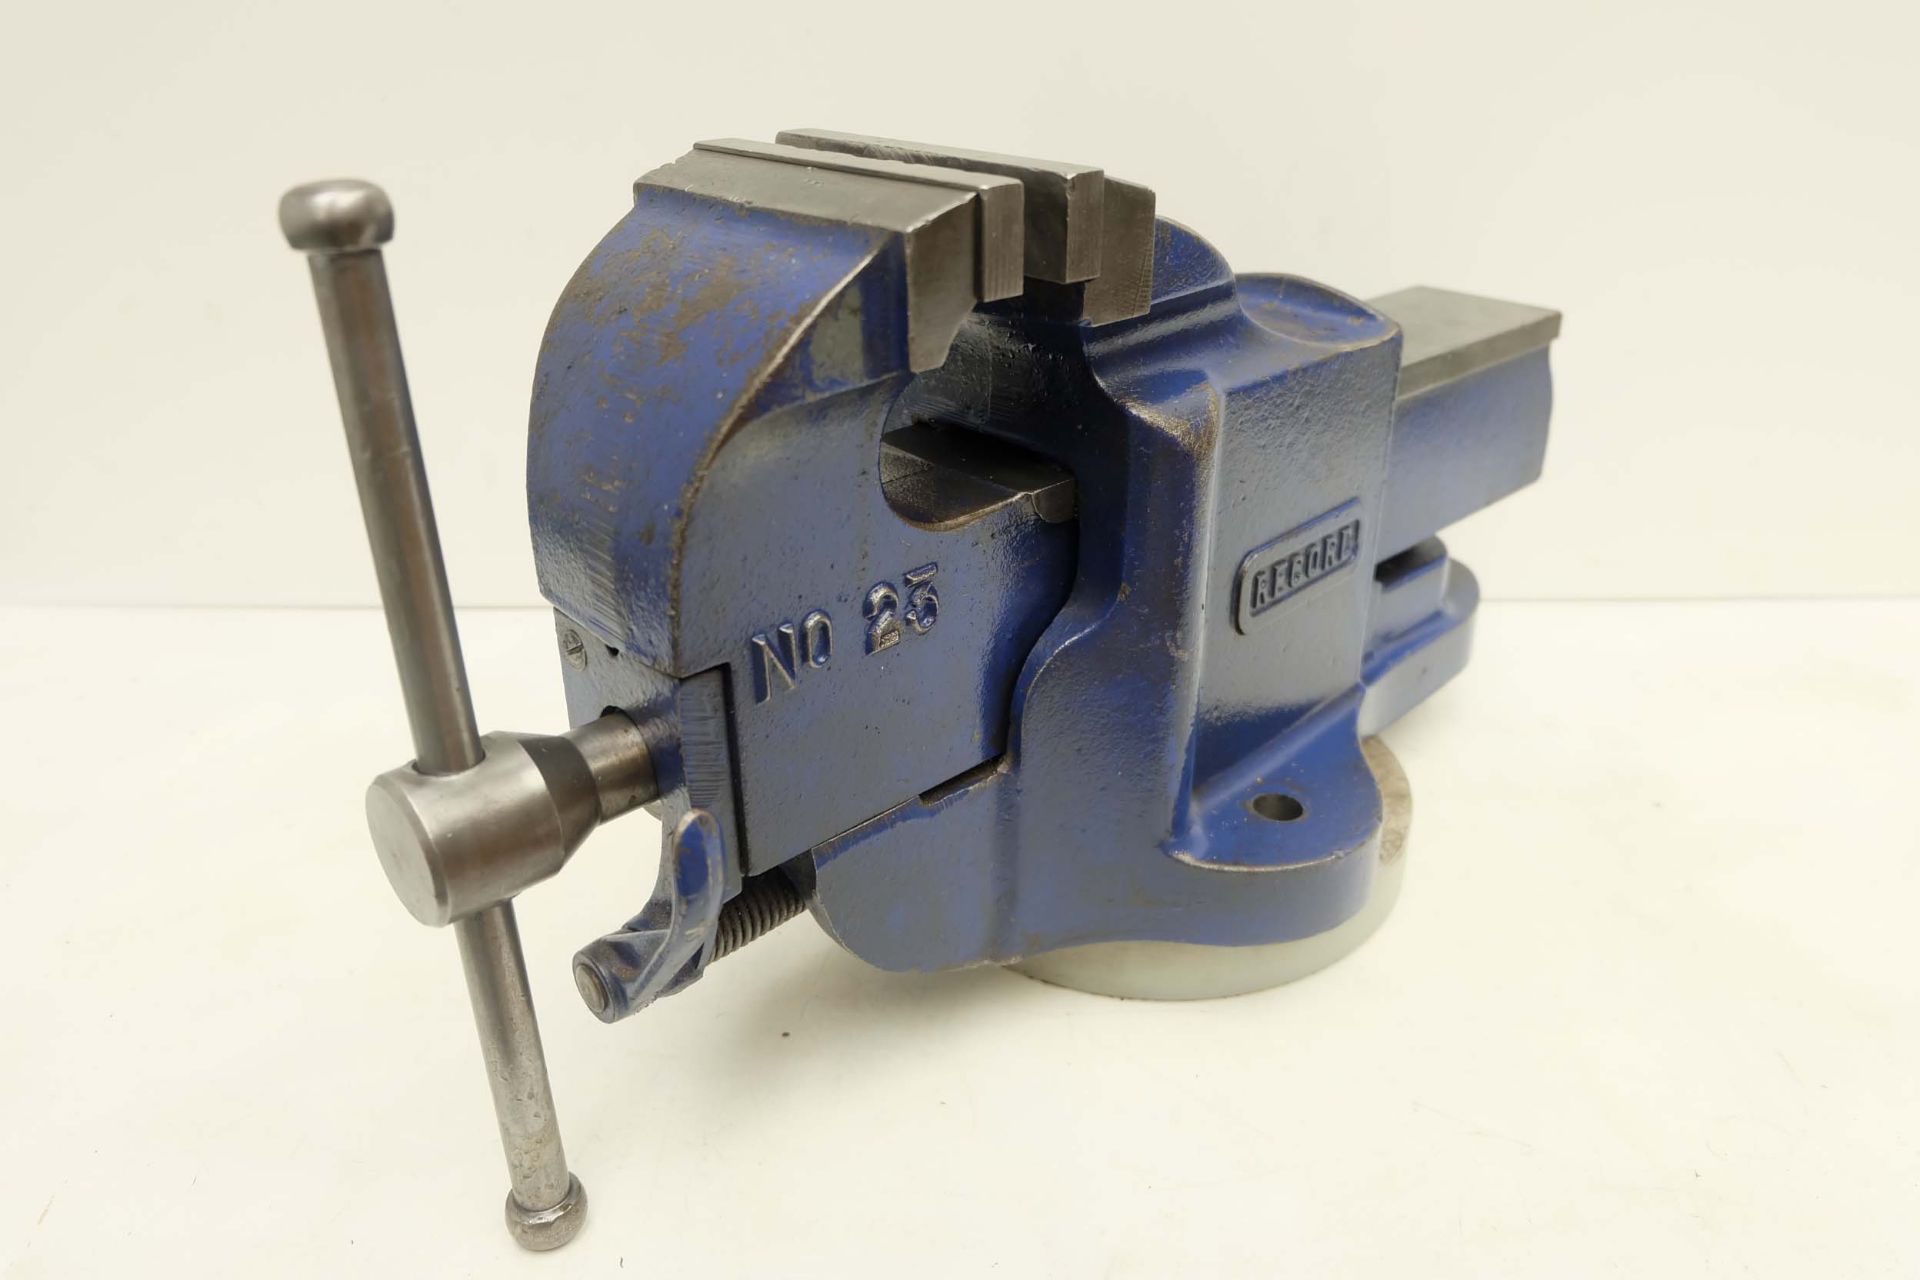 Record No.23 Bench Vice With Quick Release. Width of Jaws 4 1/4". Max Opening 6 1/4". - Image 2 of 4